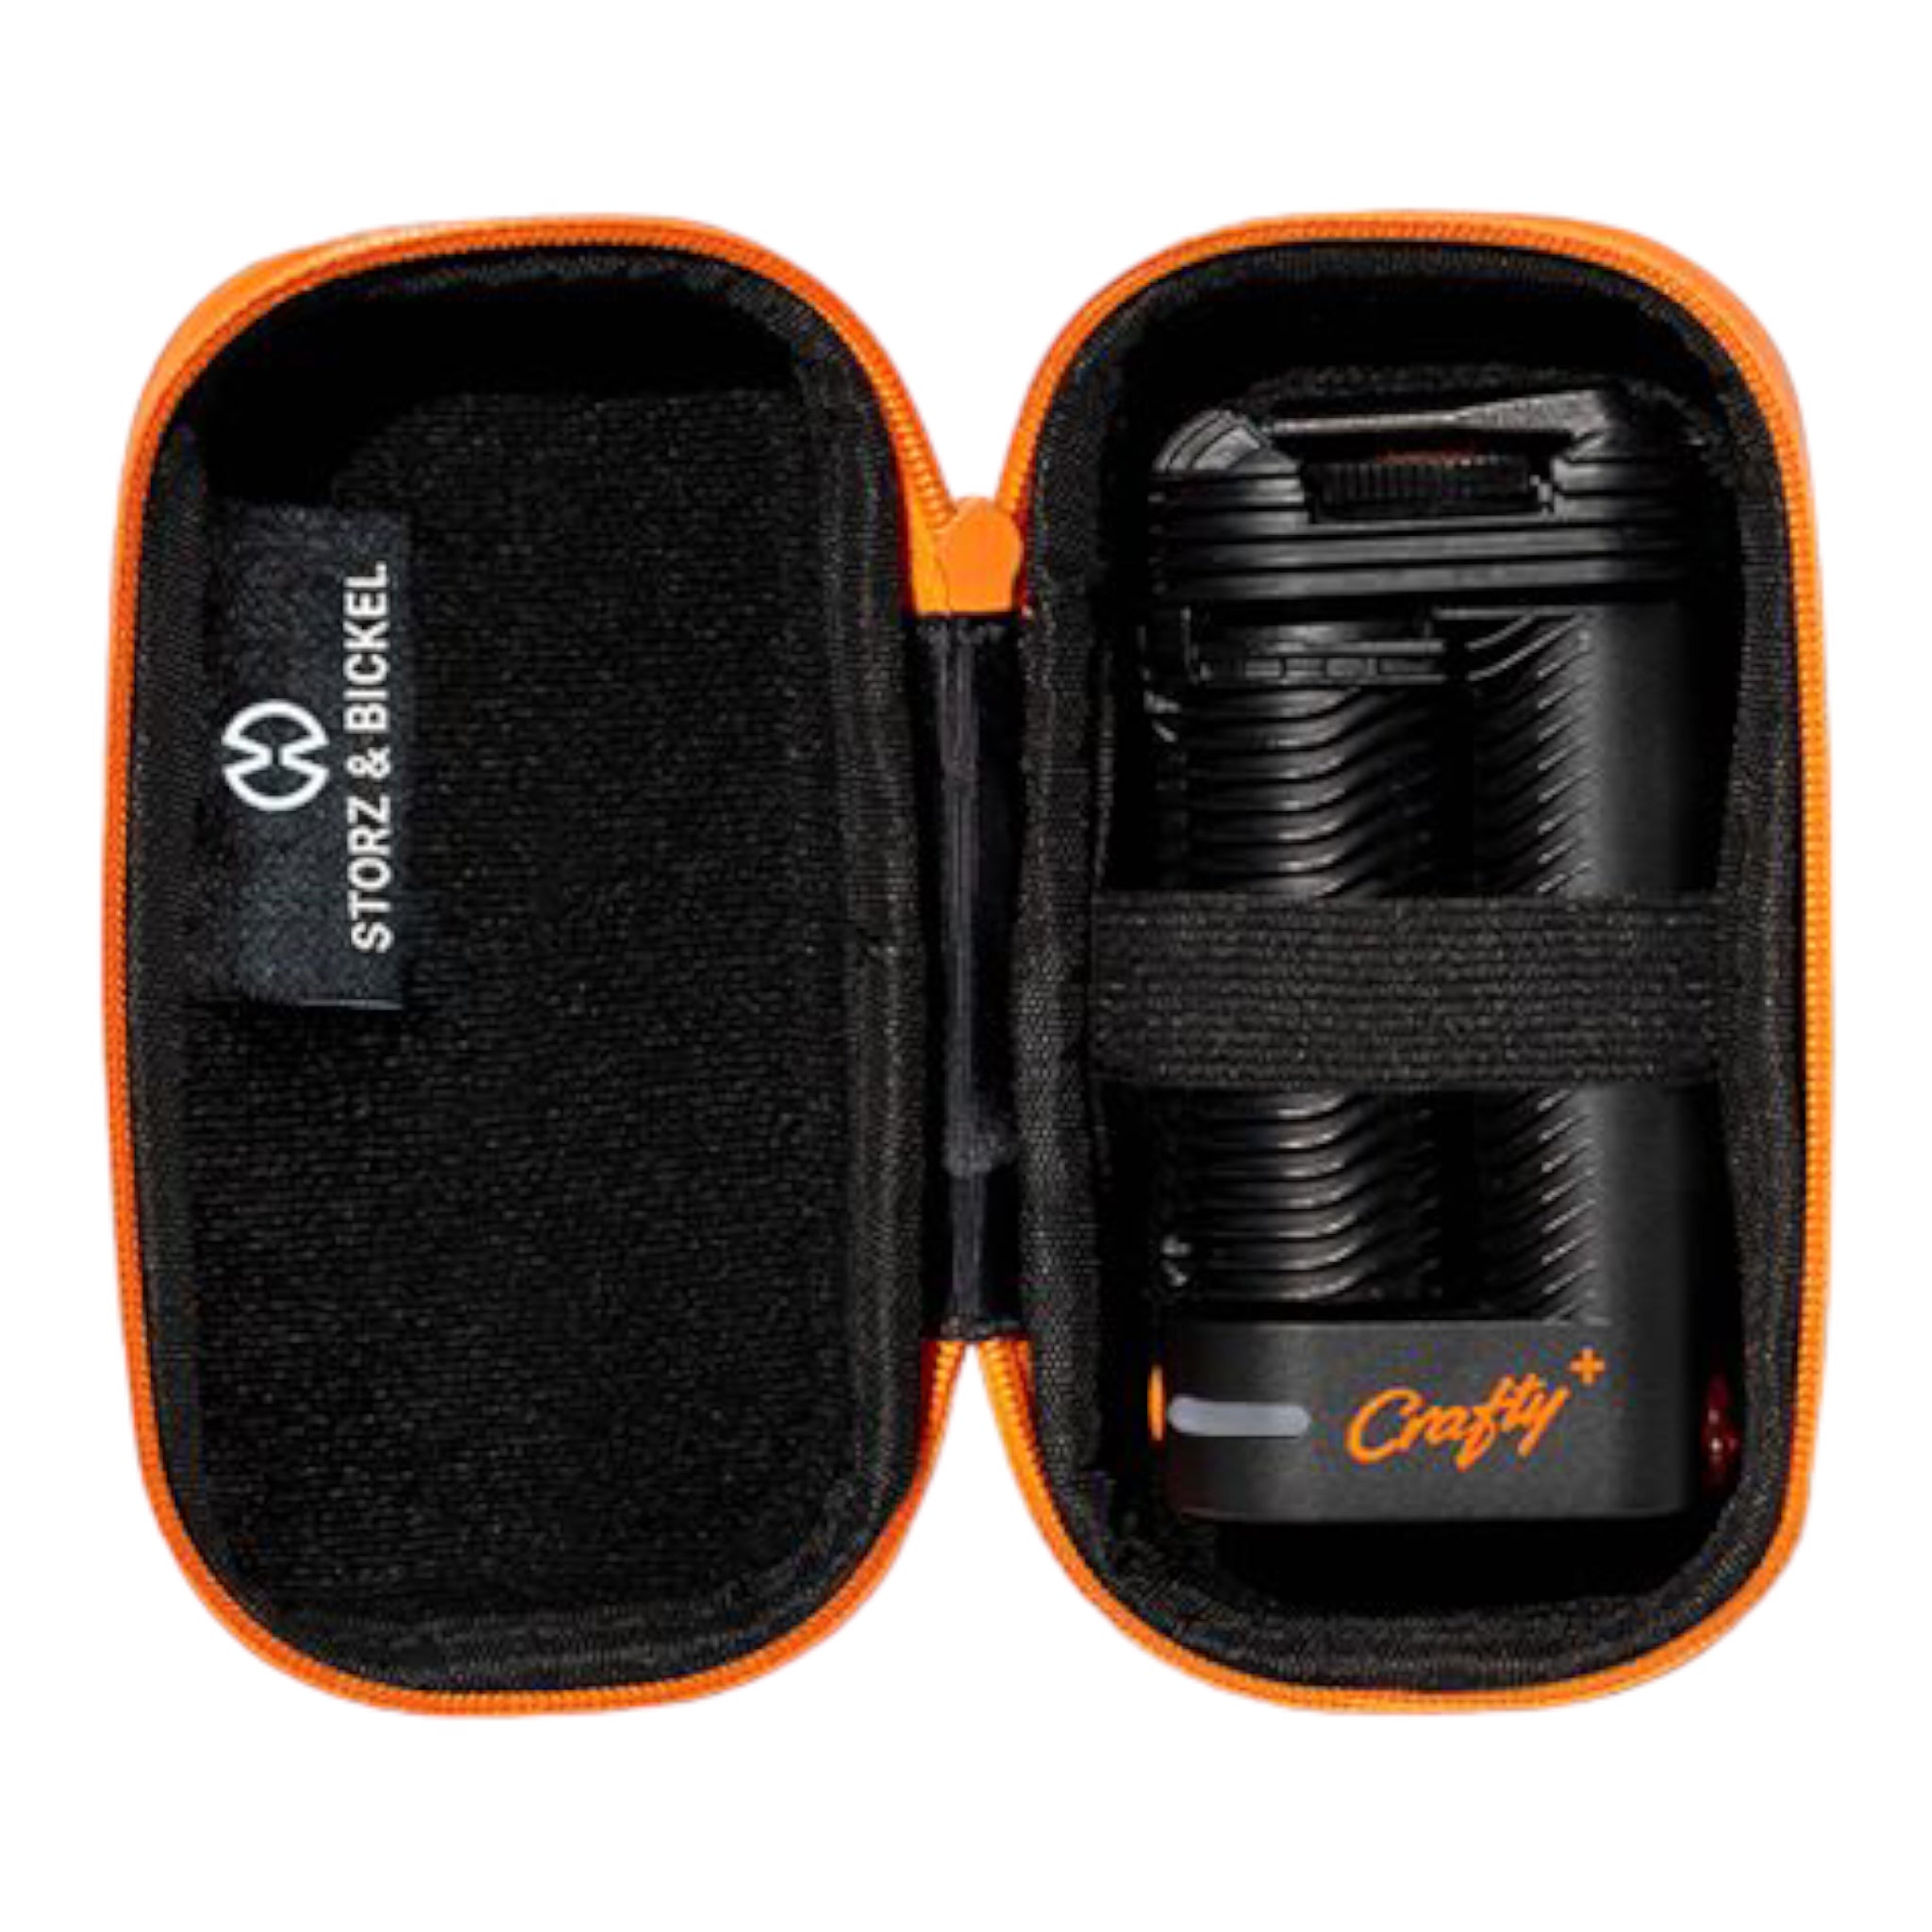 crafty+ smell proof hard case with craft dry her vape